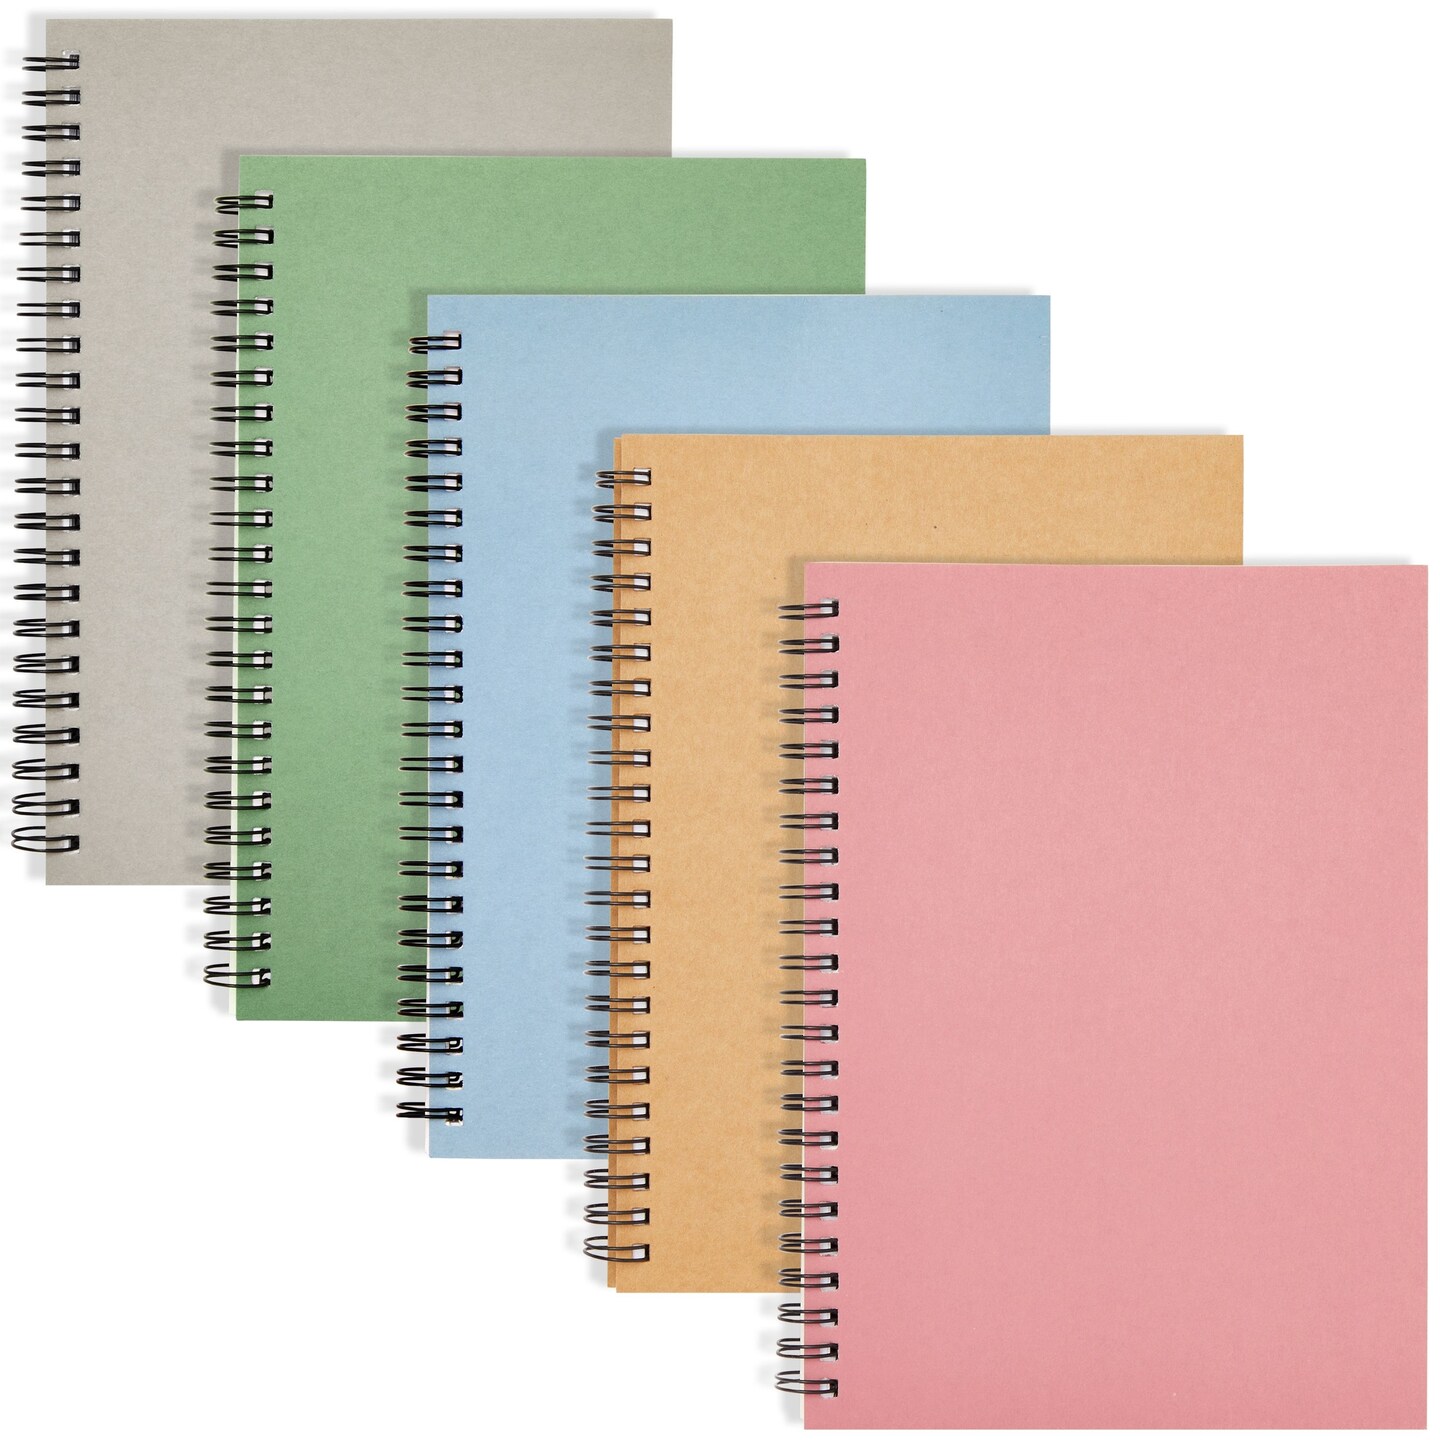 5 Pack Spiral Journal - Small Notebooks Bulk 6 x 8 with 120 Lined Pages  for Work, Students, School, Writing (5 Colors Kraft Paper Covers)